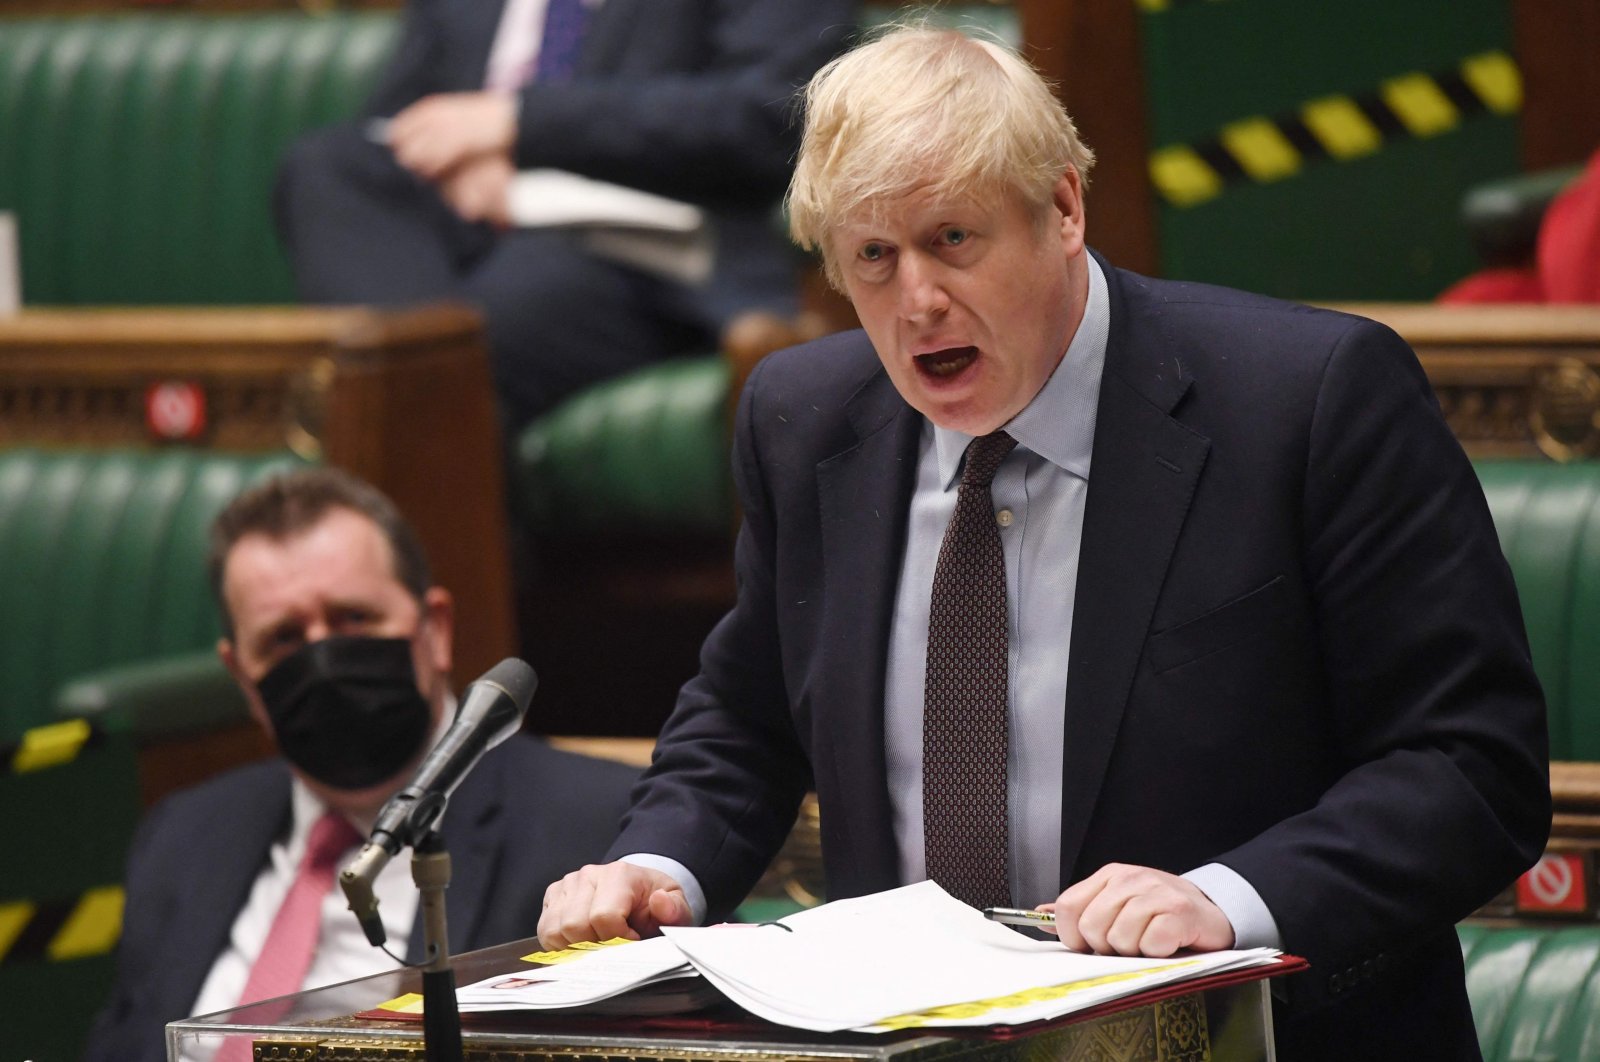 Britain's Prime Minister Boris Johnson attends the weekly Prime Minister's Questions (PMQs) in the House of Commons in London, England, May 26, 2021. (AFP Photo/UK Parliament/Jessica Taylor)